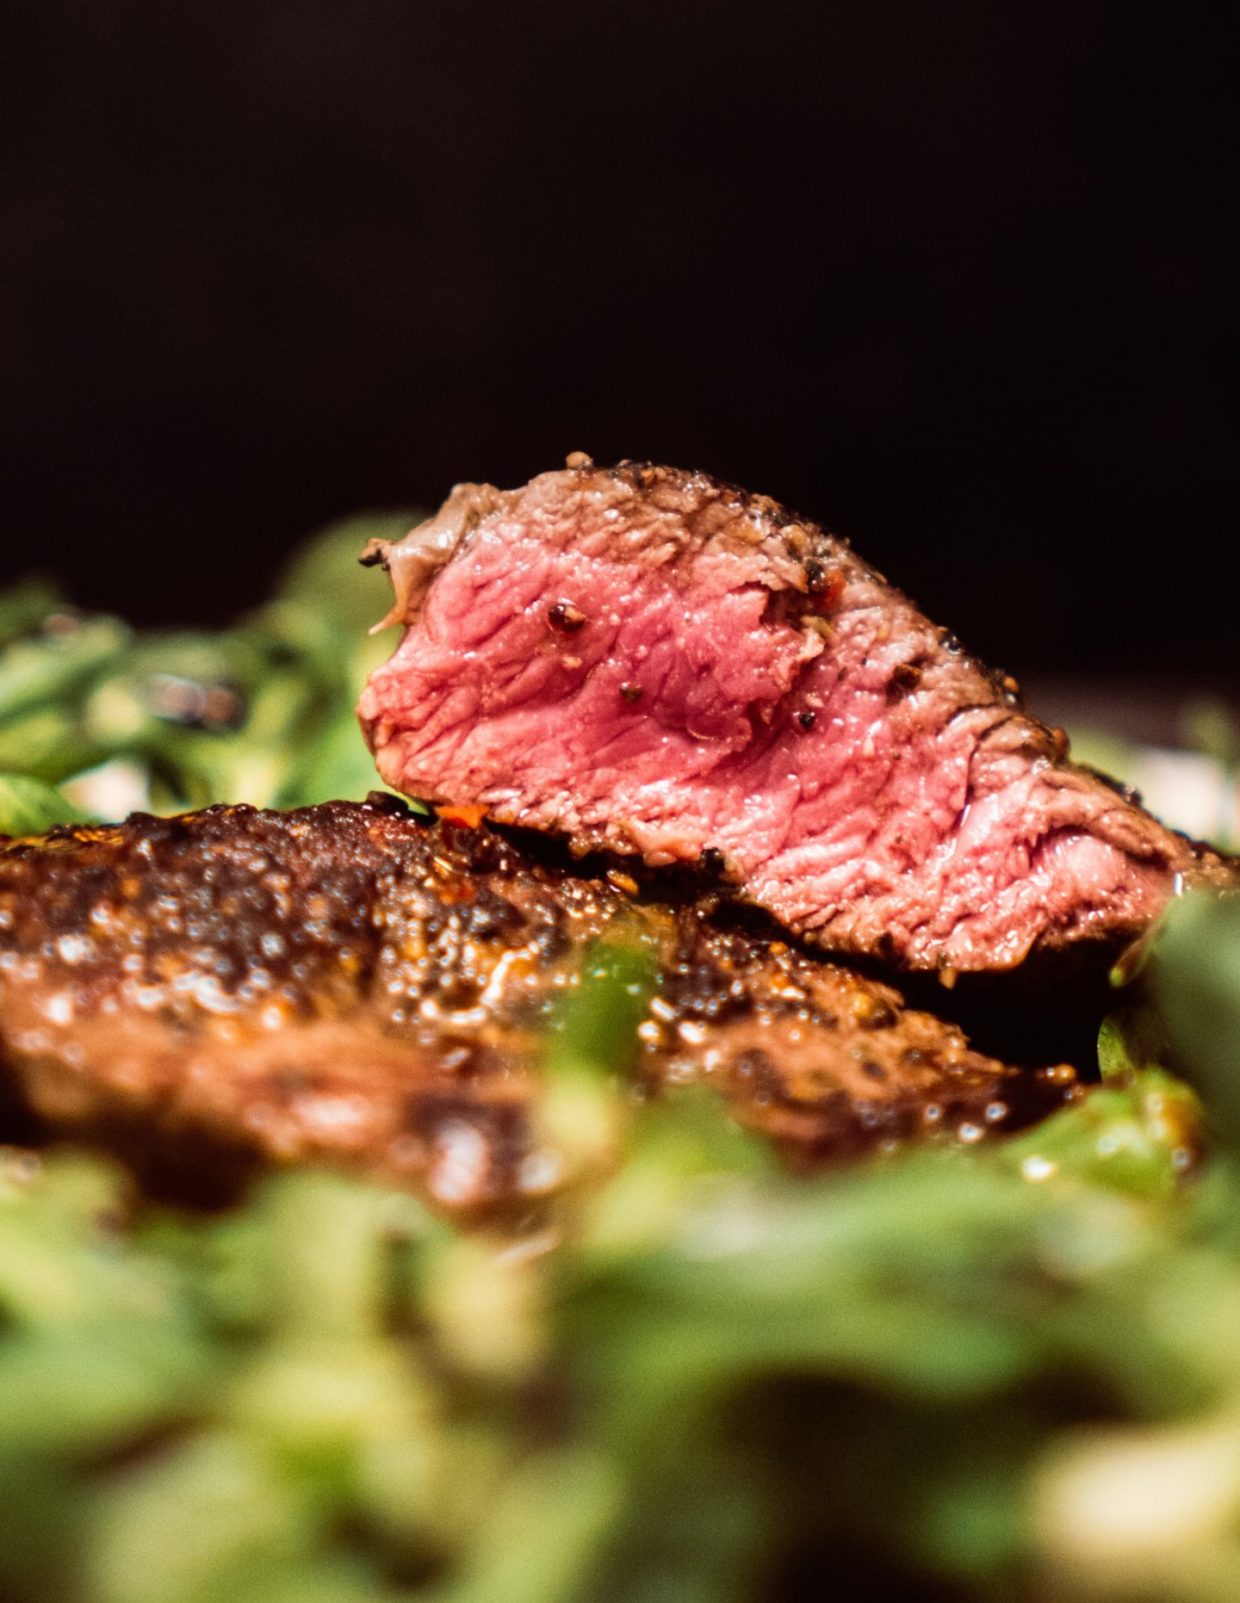 Close-up image of medium rare steak used for display as feature image on post.